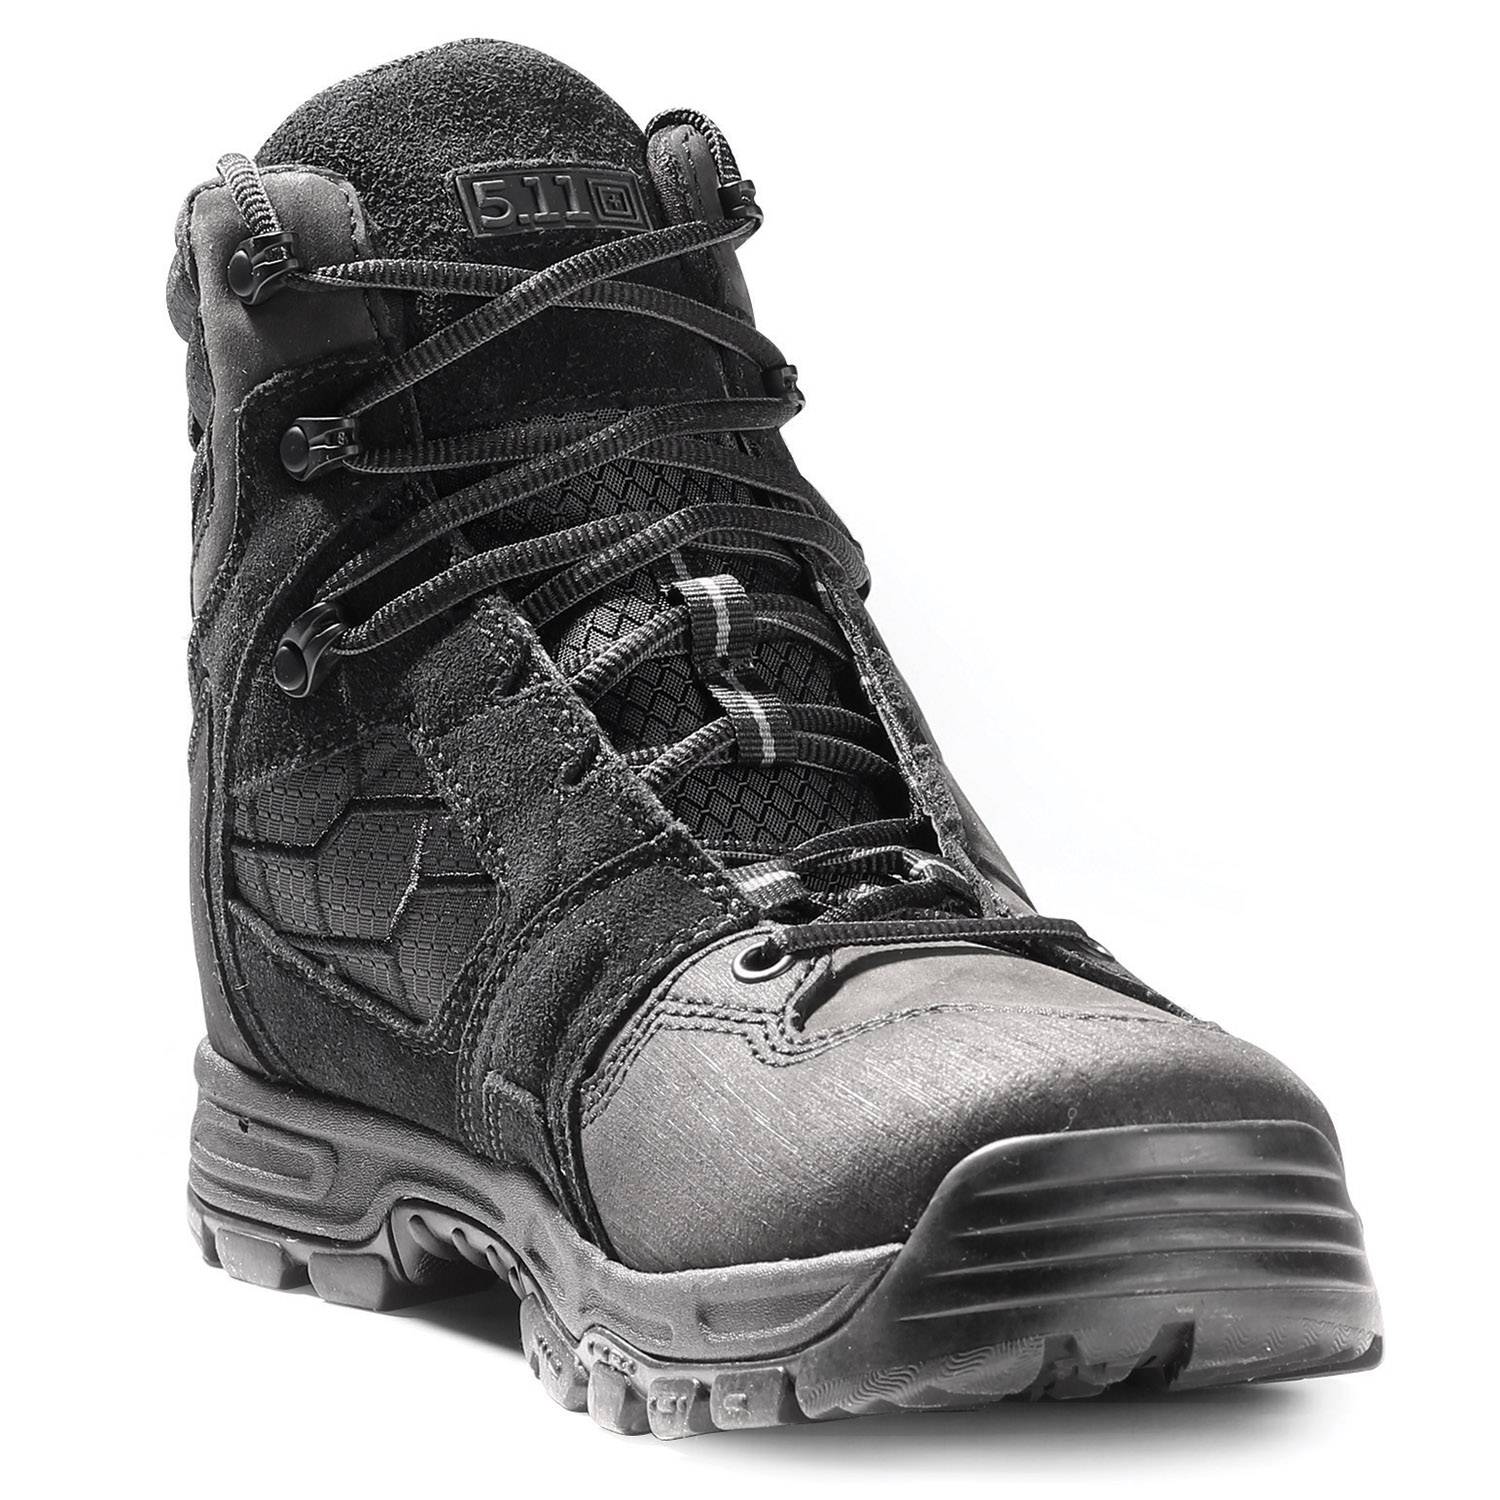 NEW 5.11 Tactical Trainer 2.0 Mid Mens 12 Hiking Shoes Work Trail Boots Rt$100 